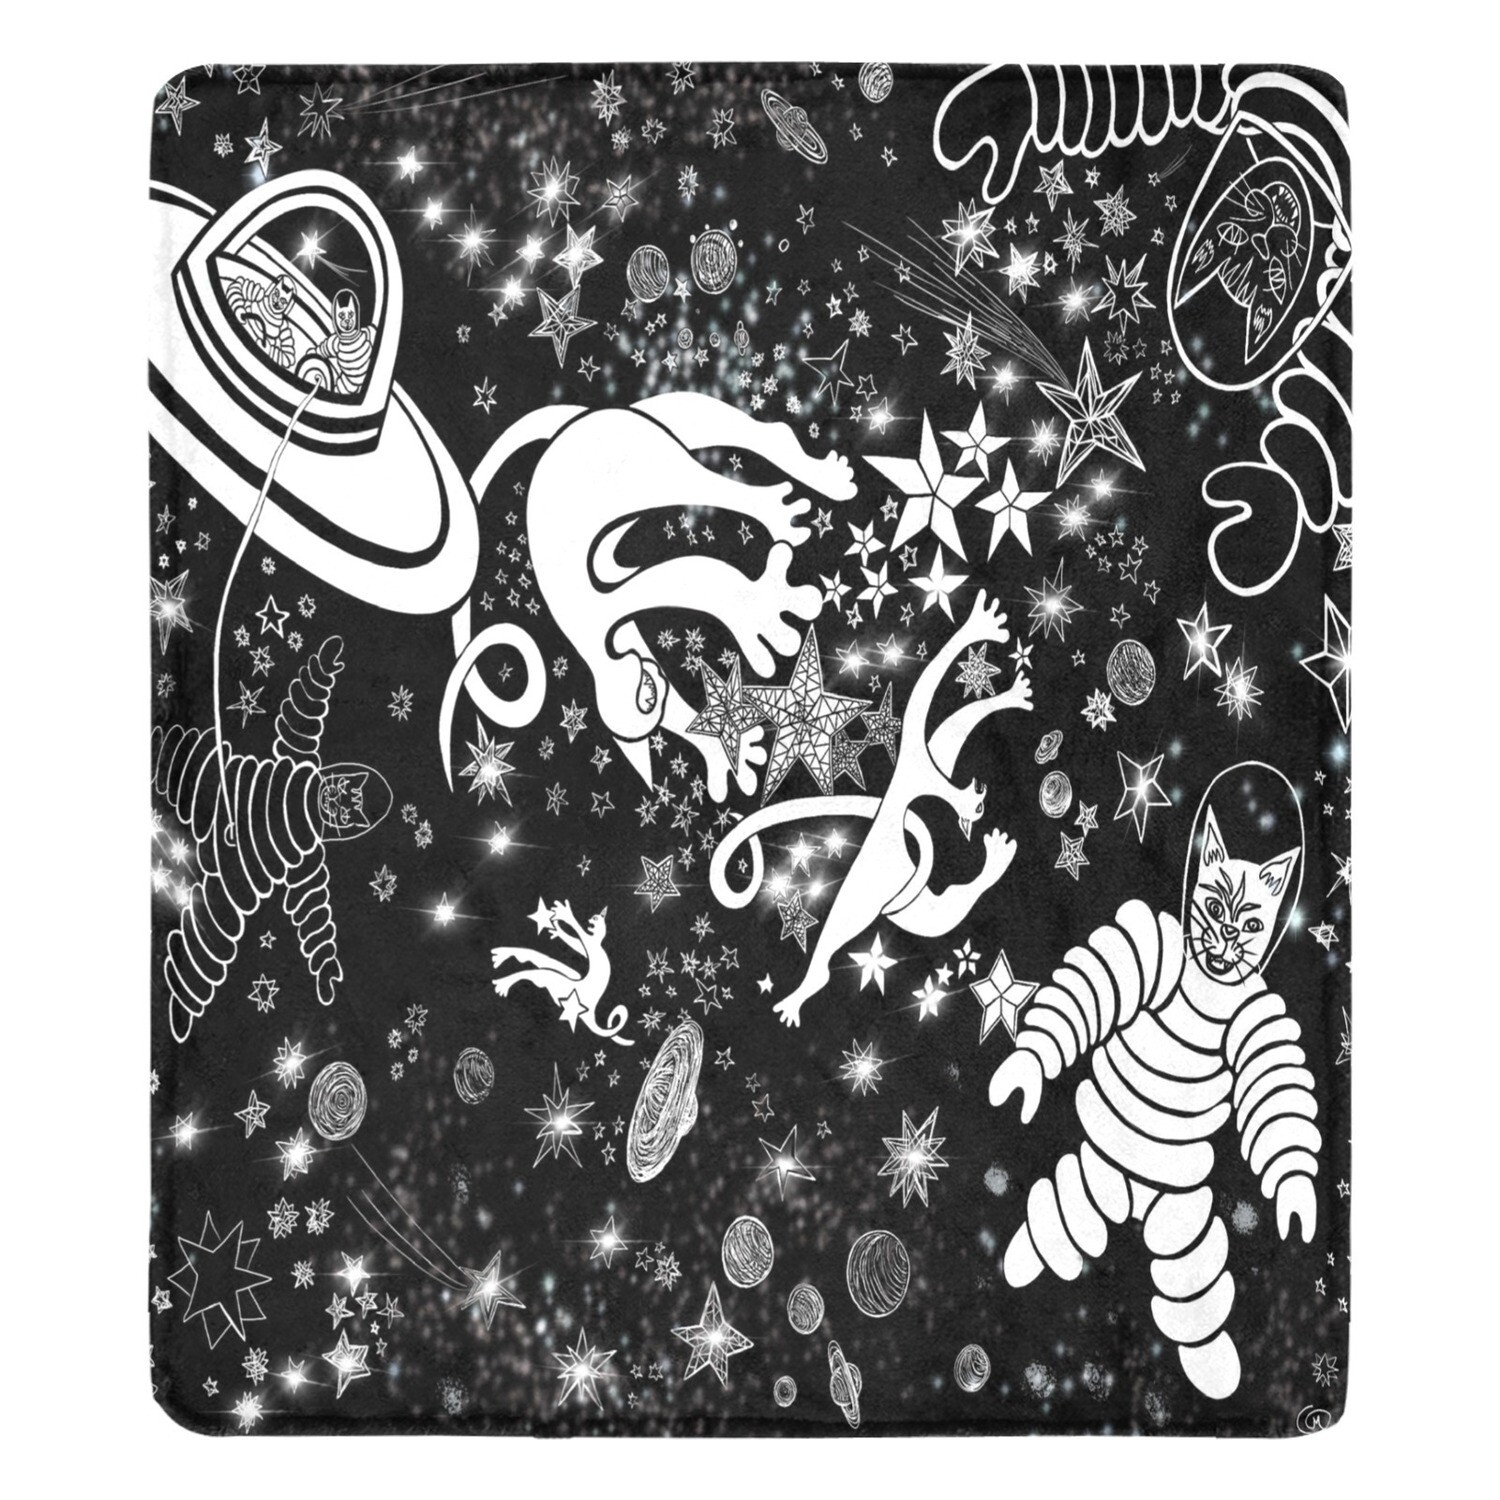 🤴🏽👸🏽🐈🚀Large Ultra-Soft Micro Fleece Blanket Cats and Astronauts, Flying Saucer, Stars by Maru, gift, gift for her, gift for him, gift for them, 70"x80", black & white